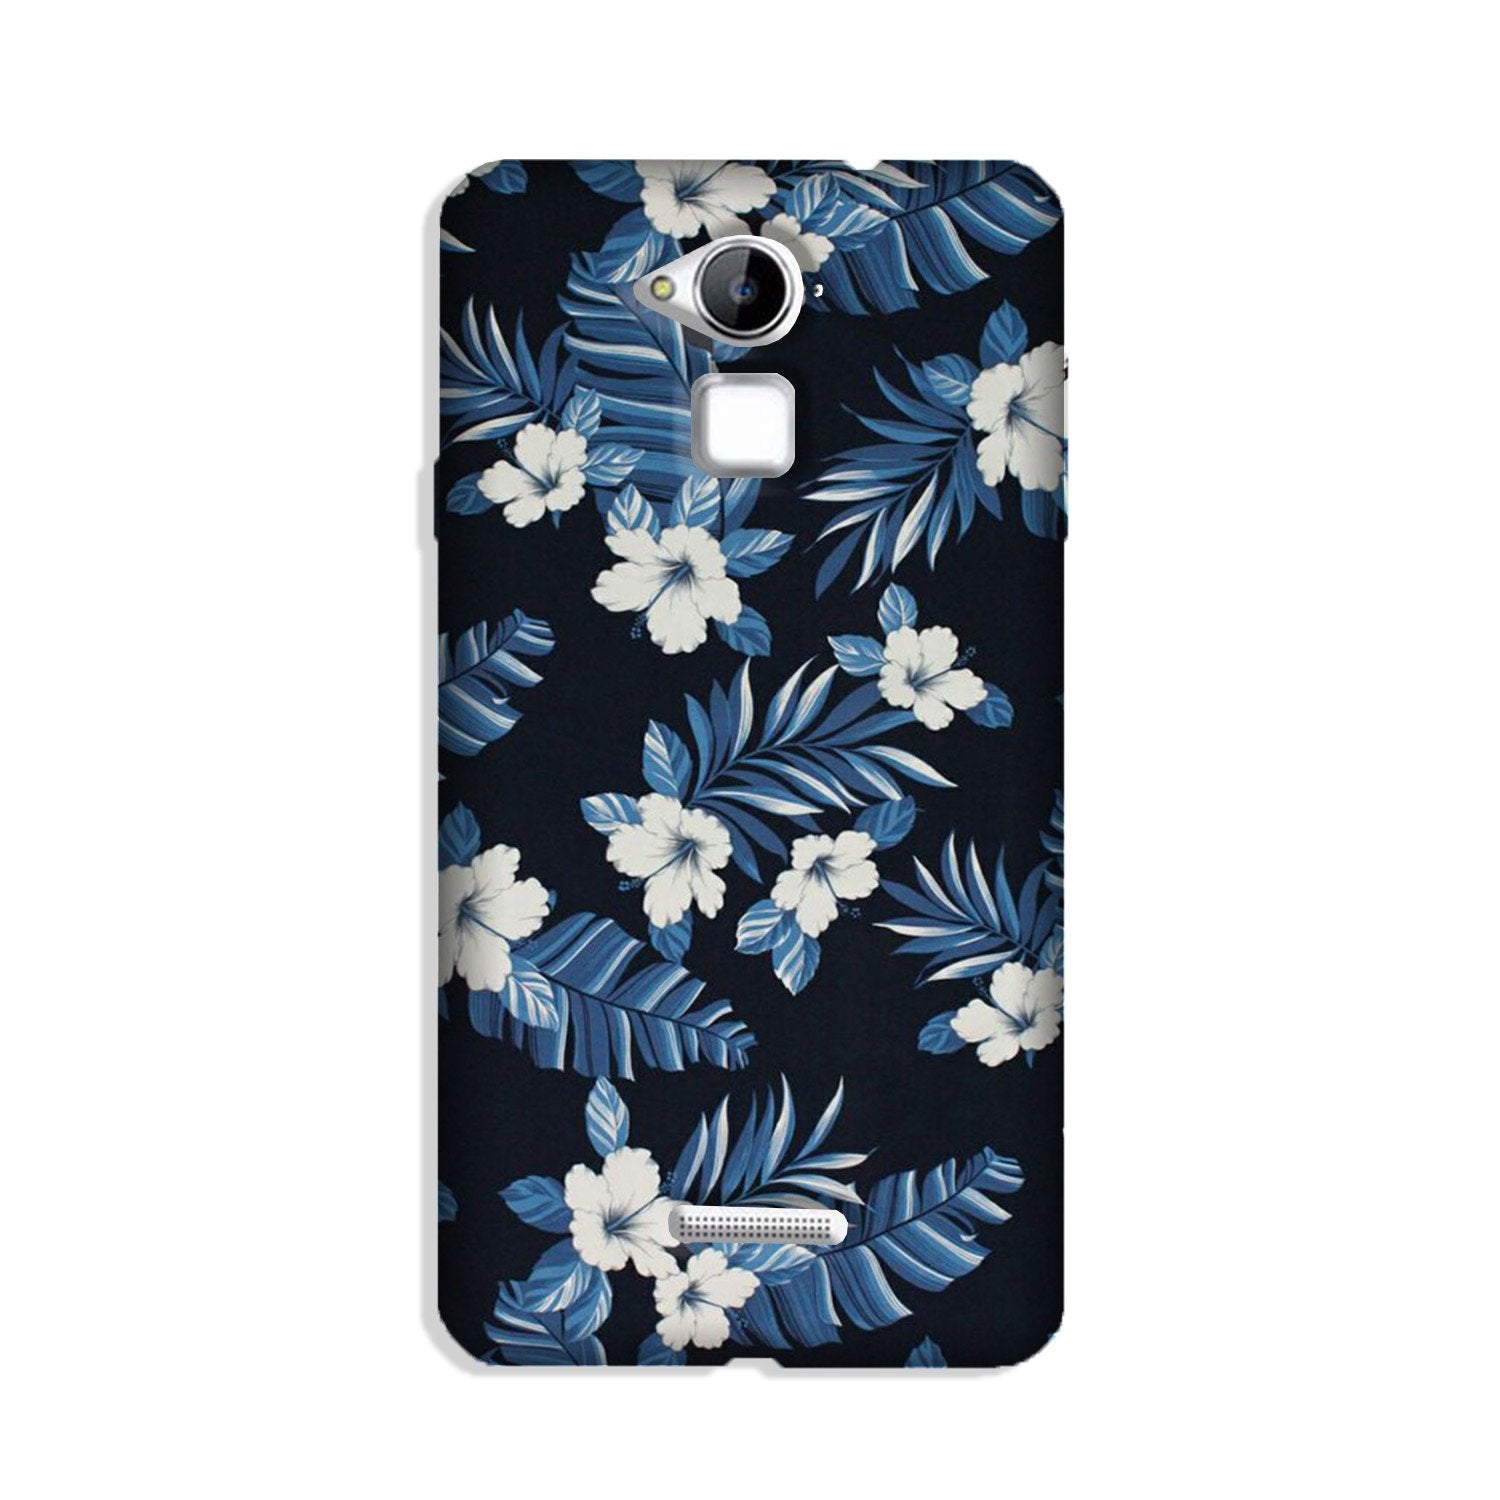 White flowers Blue Background2 Case for Coolpad Note 3